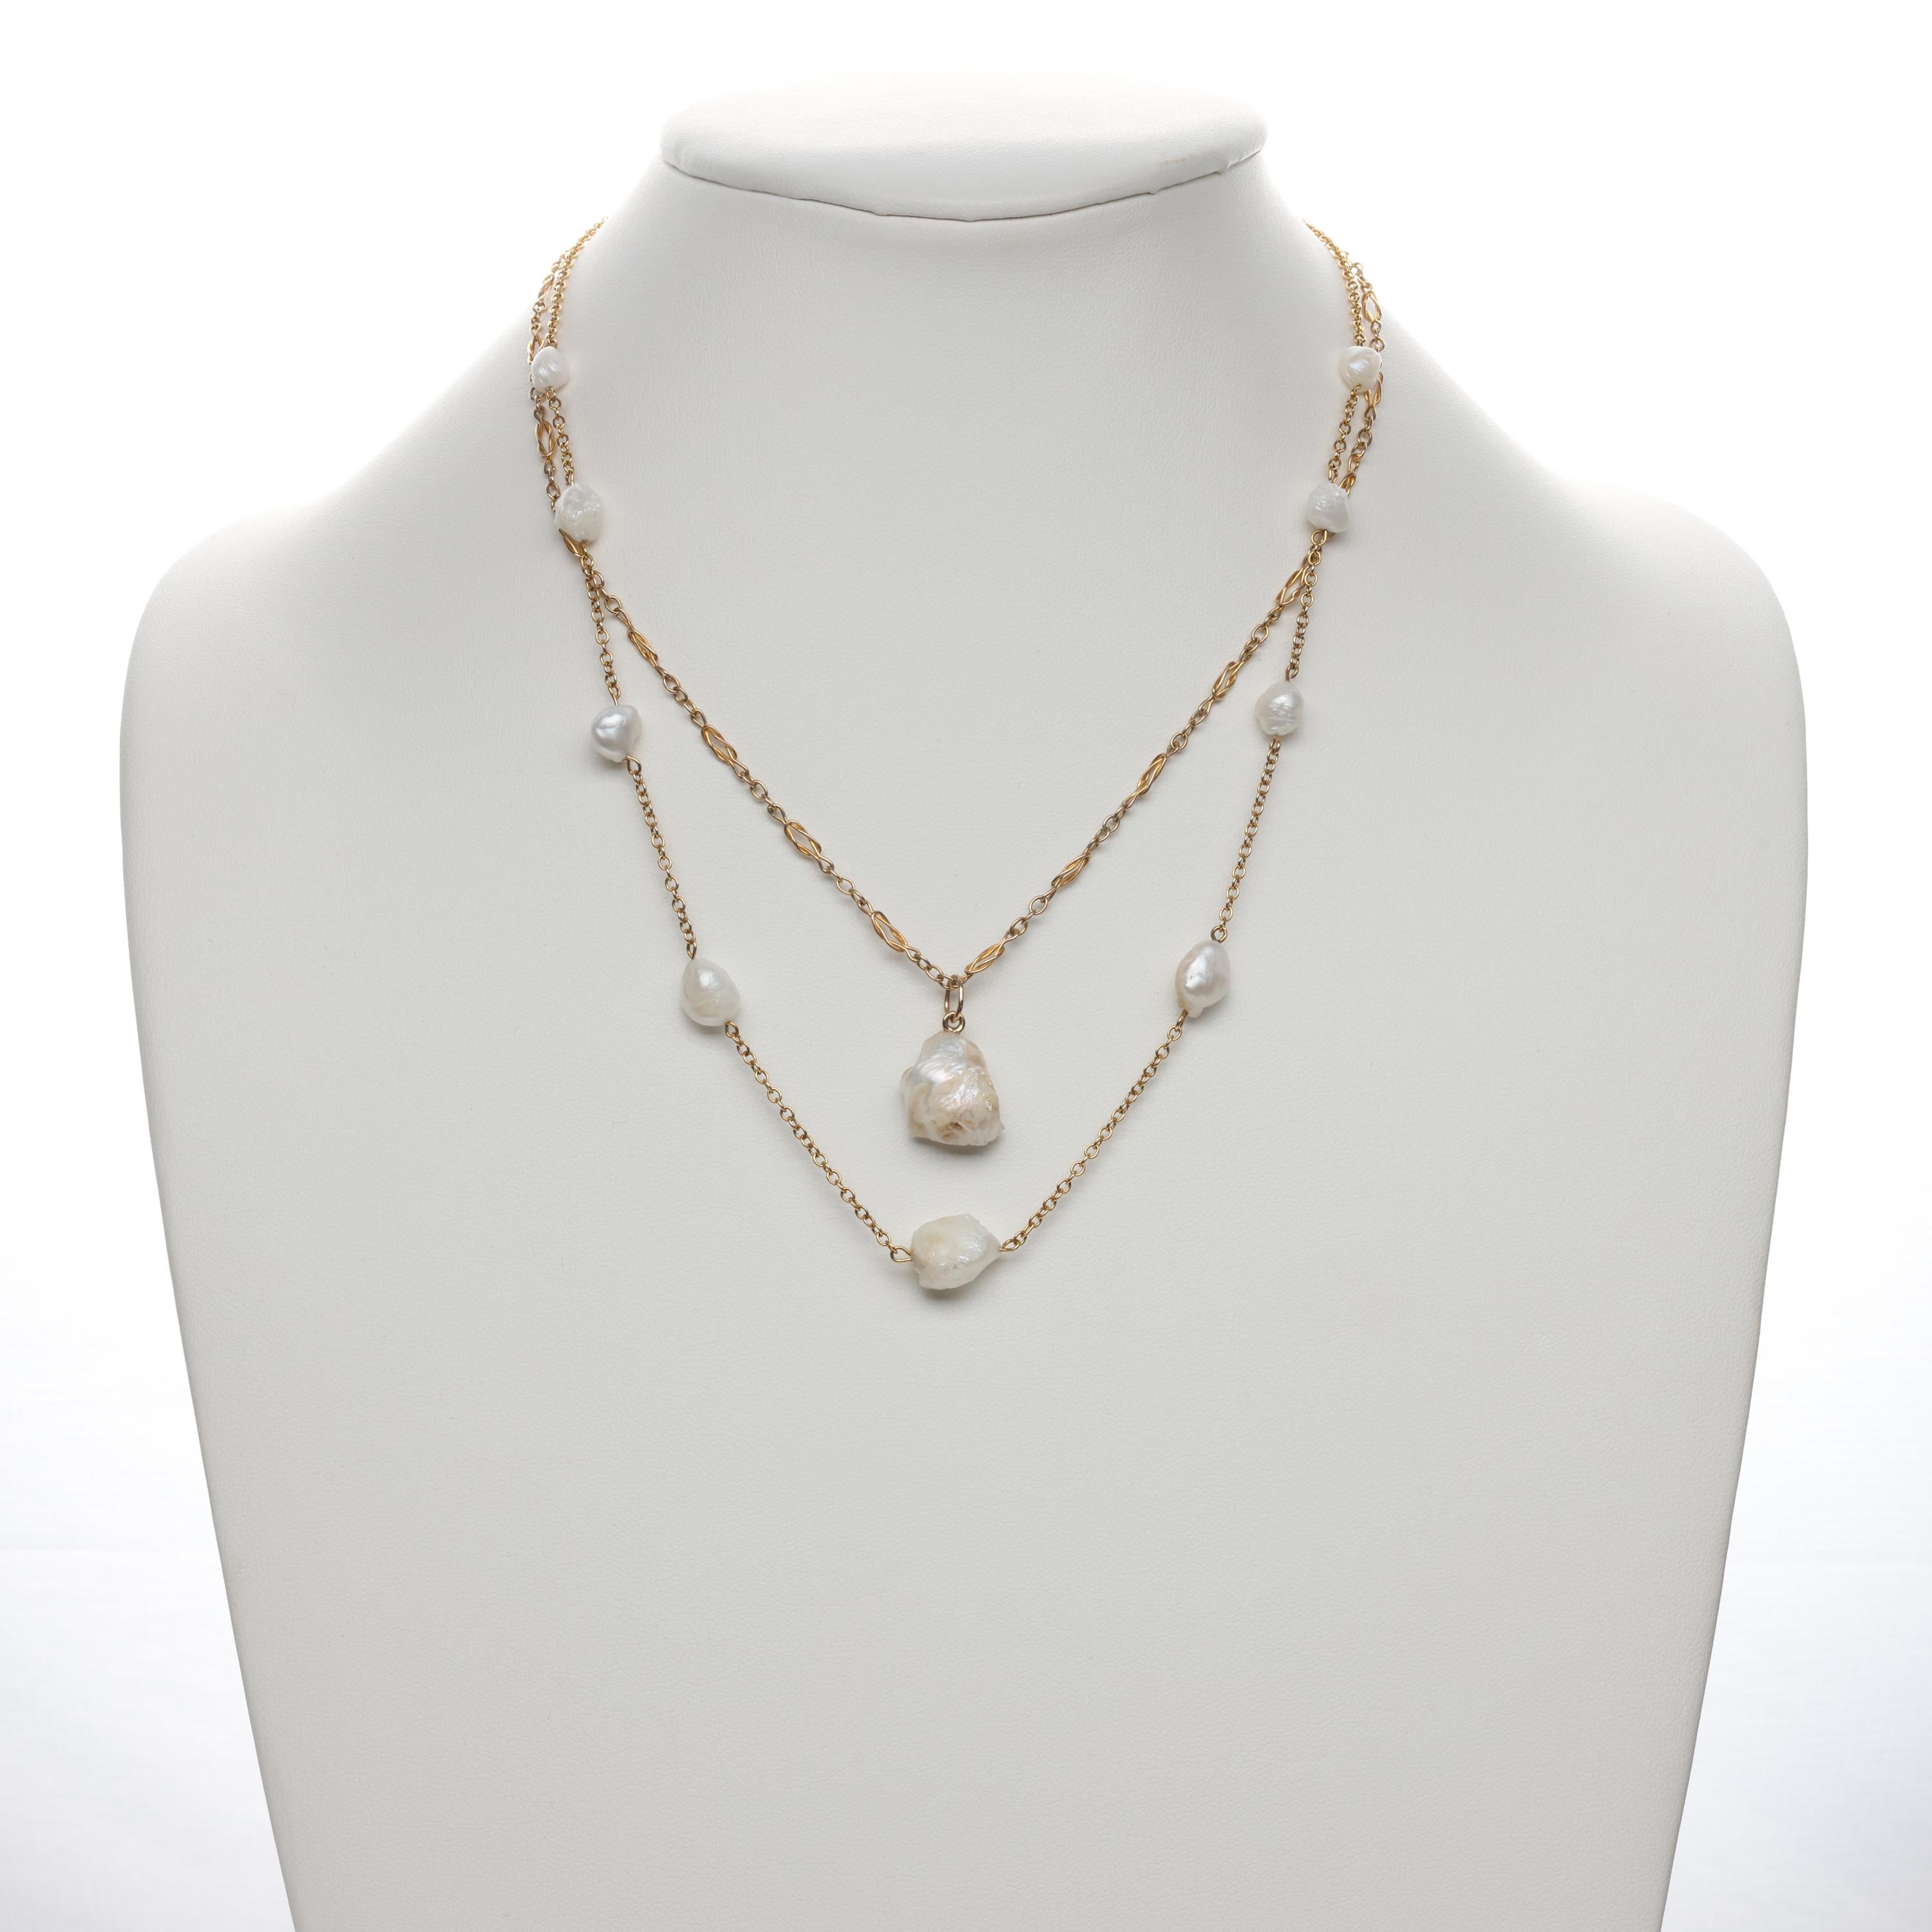 This is a rare and breathtaking natural river pearl parure featuring GIA-certified natural (uncultured) river pearls in composition with buttery 14K yellow gold to create a necklace, a pendant and a luxurious pair of dangle earrings. I believe the